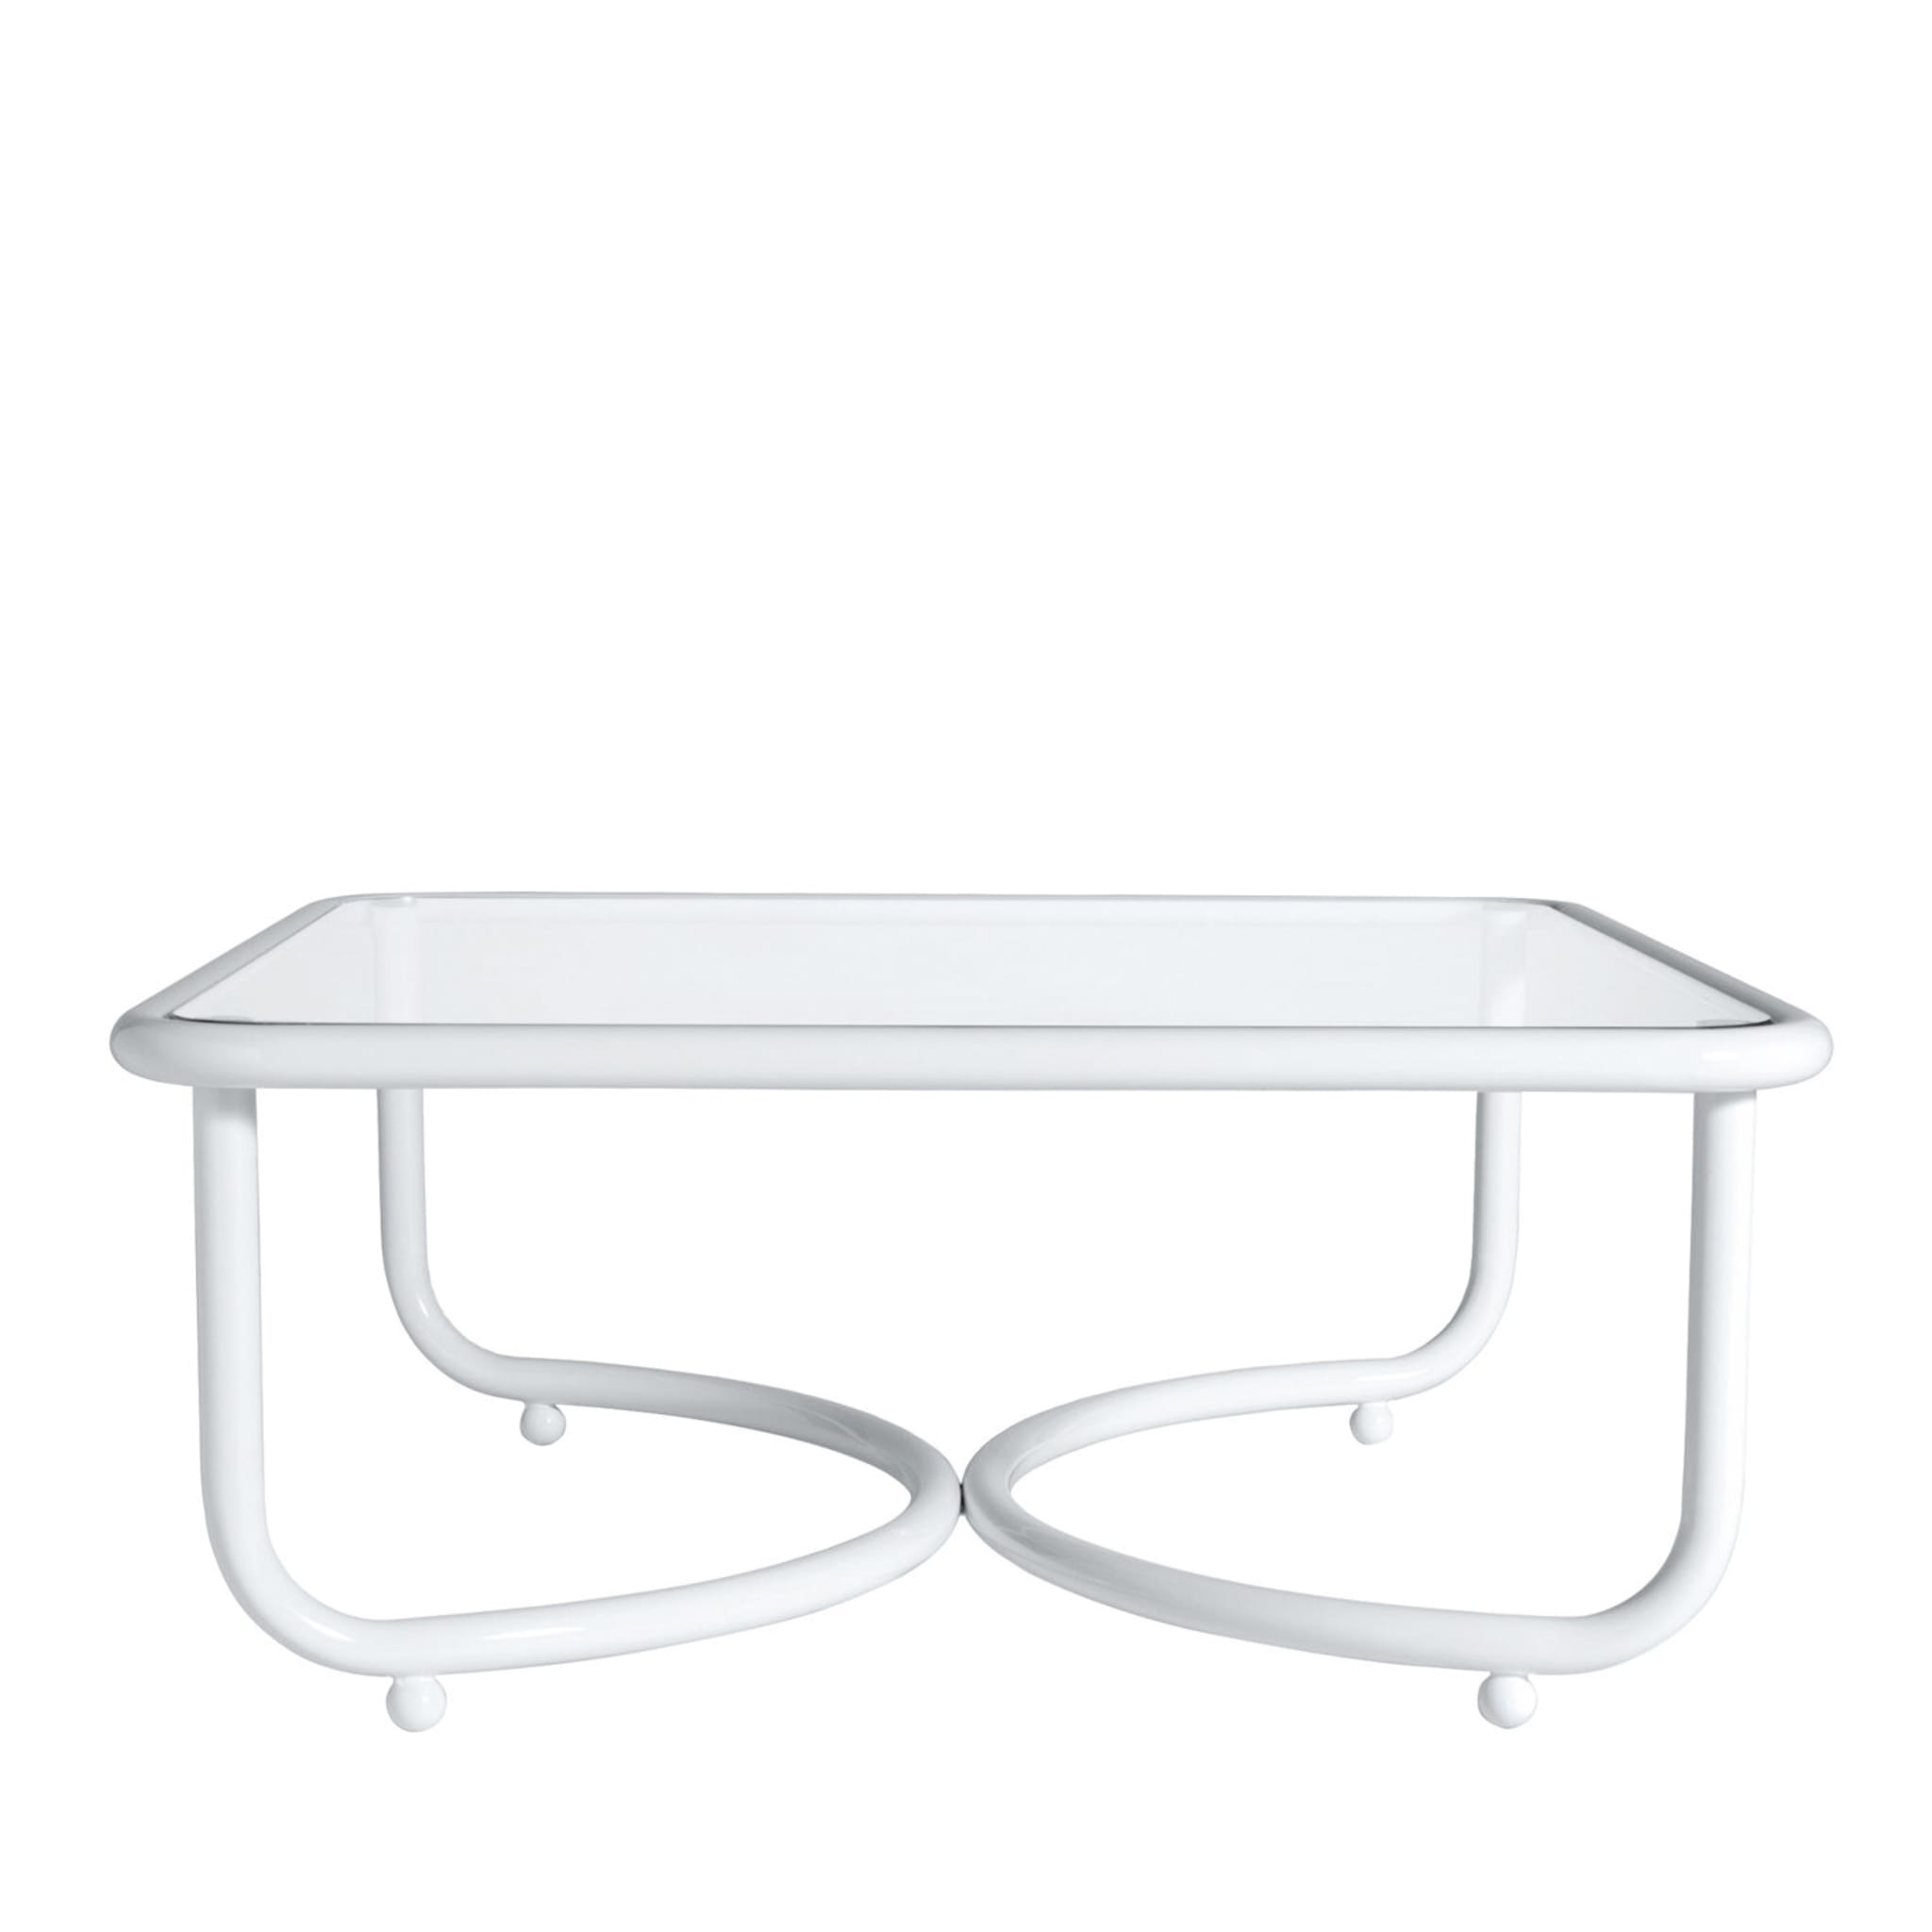 Locus Solus White Low Table by Gae Aulenti - Main view